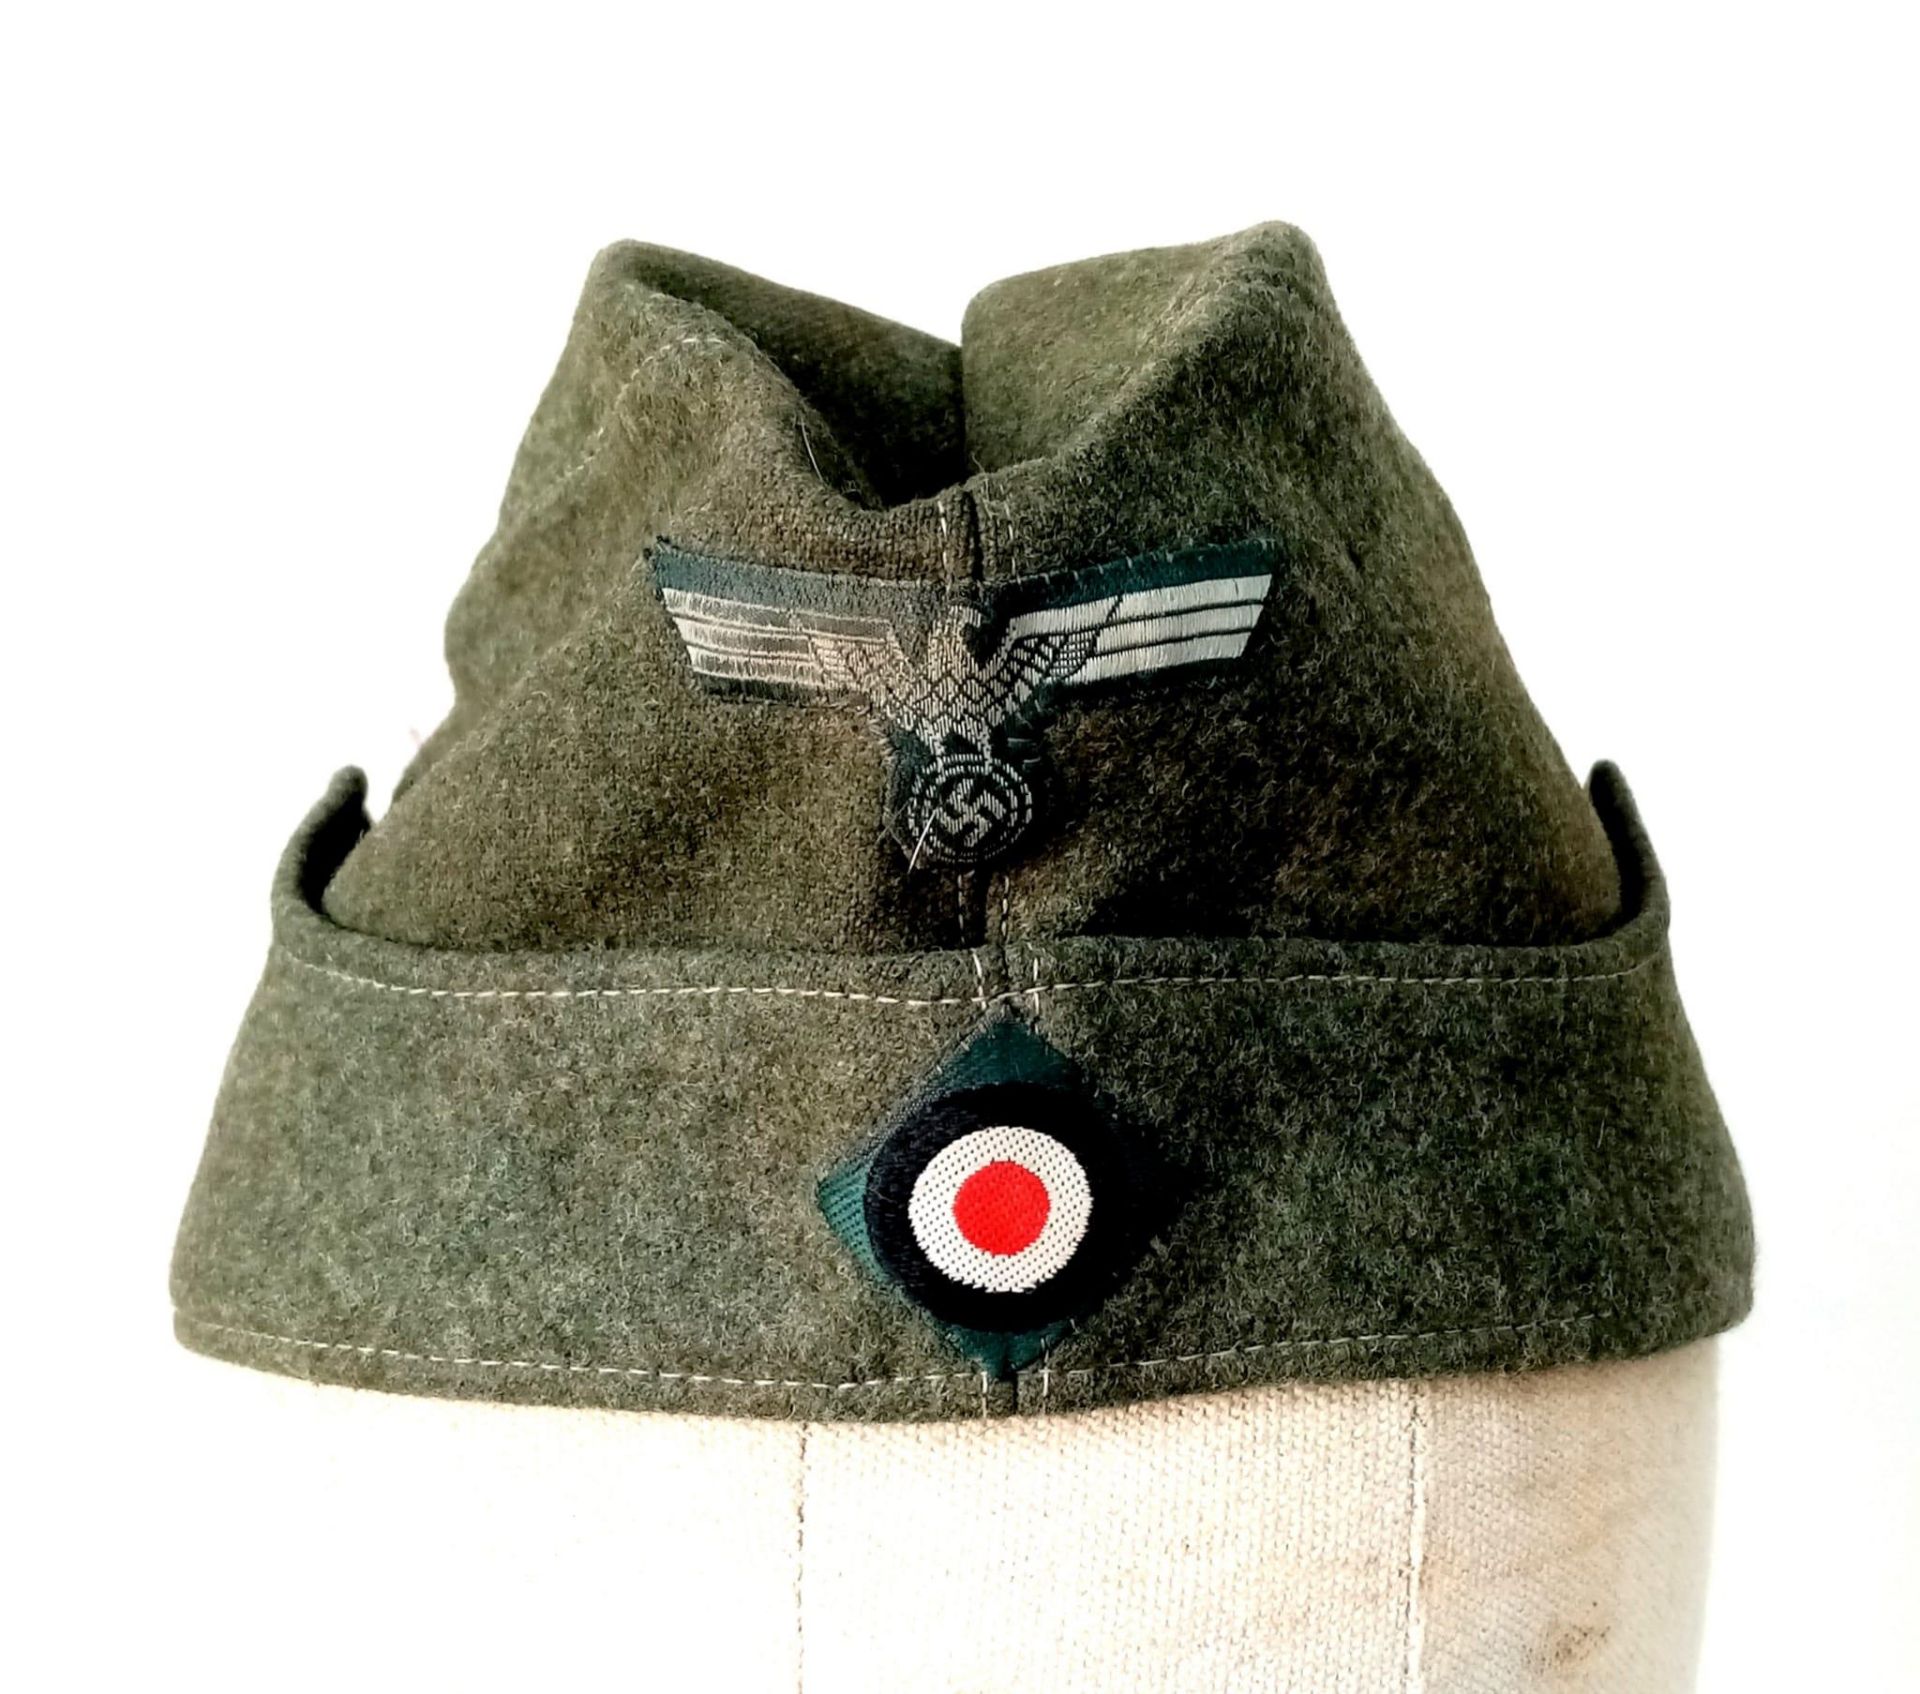 WW2 German Heer (Army) M34 Overseas Side Cap. Good condition for its age.